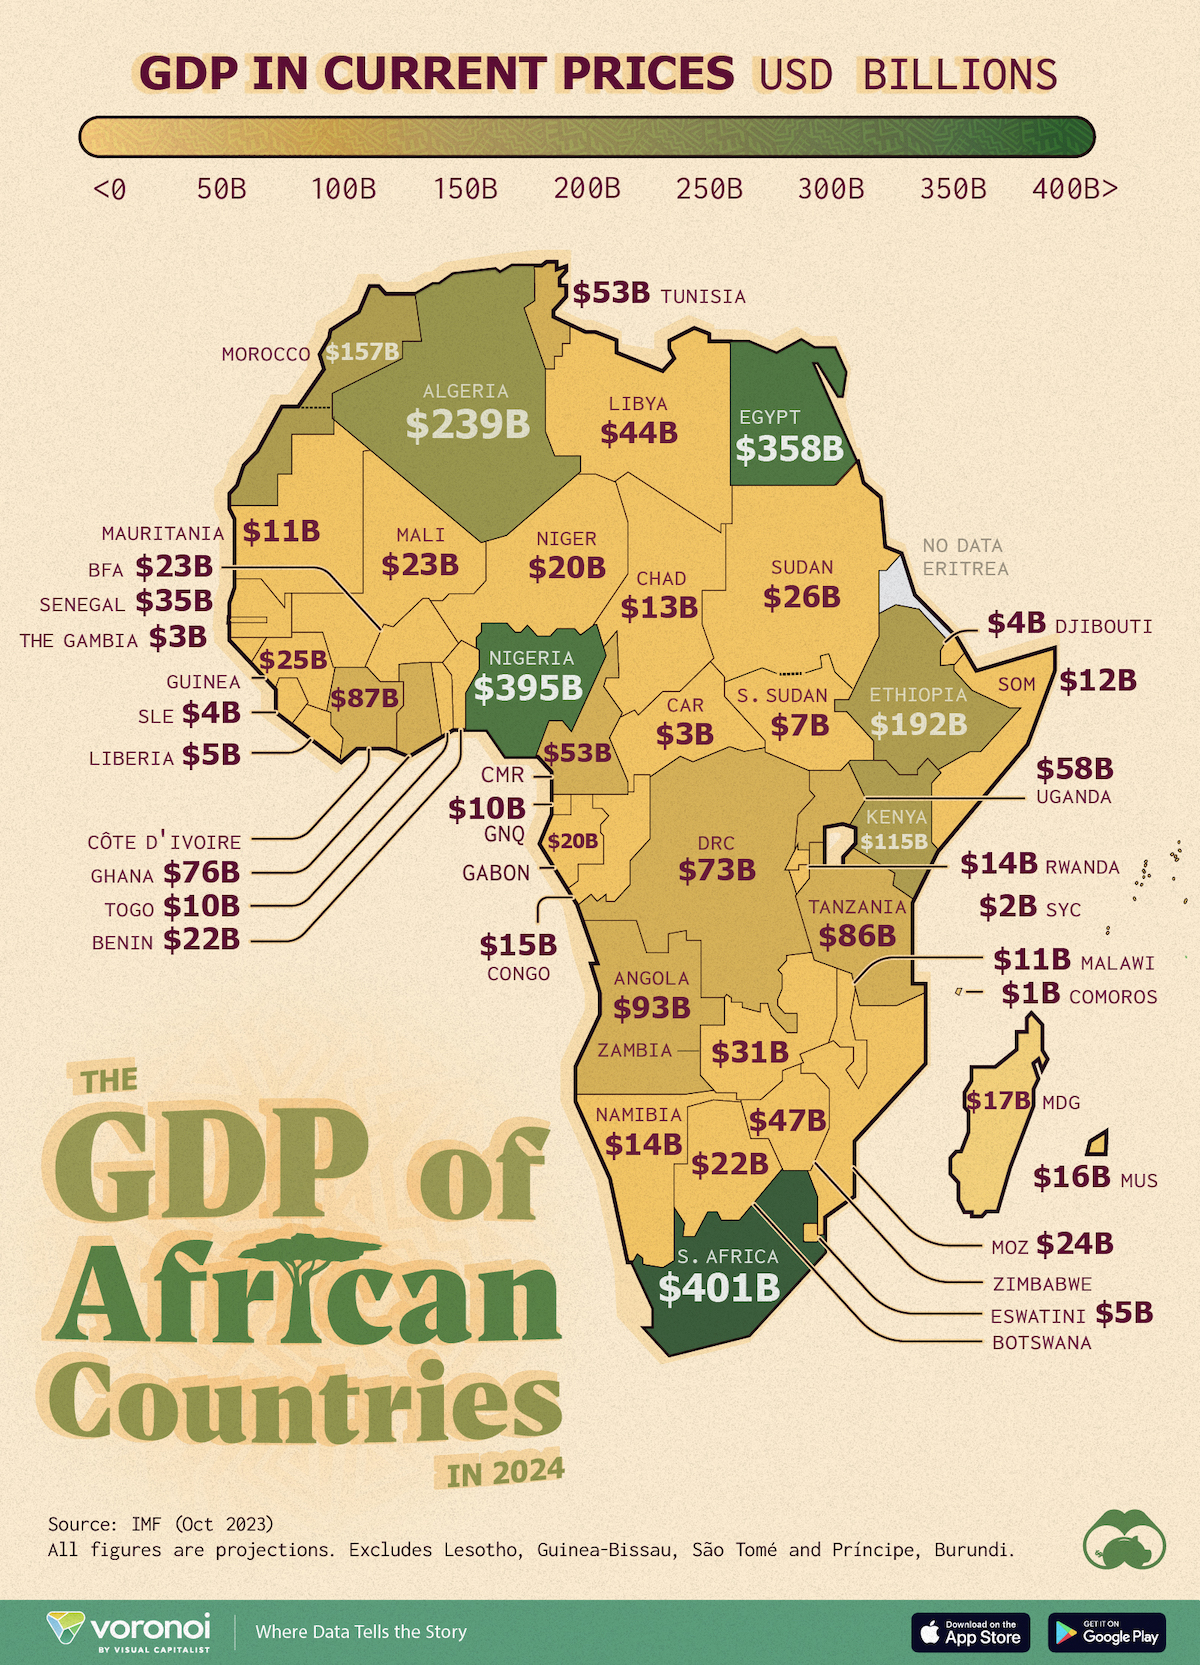 A map of the $3 trillion African Economy labelled by each country's economic output, excluding Eritrea, Burundi, Lesotho, Guinea-Bissau, and São Tomé and Príncipe.